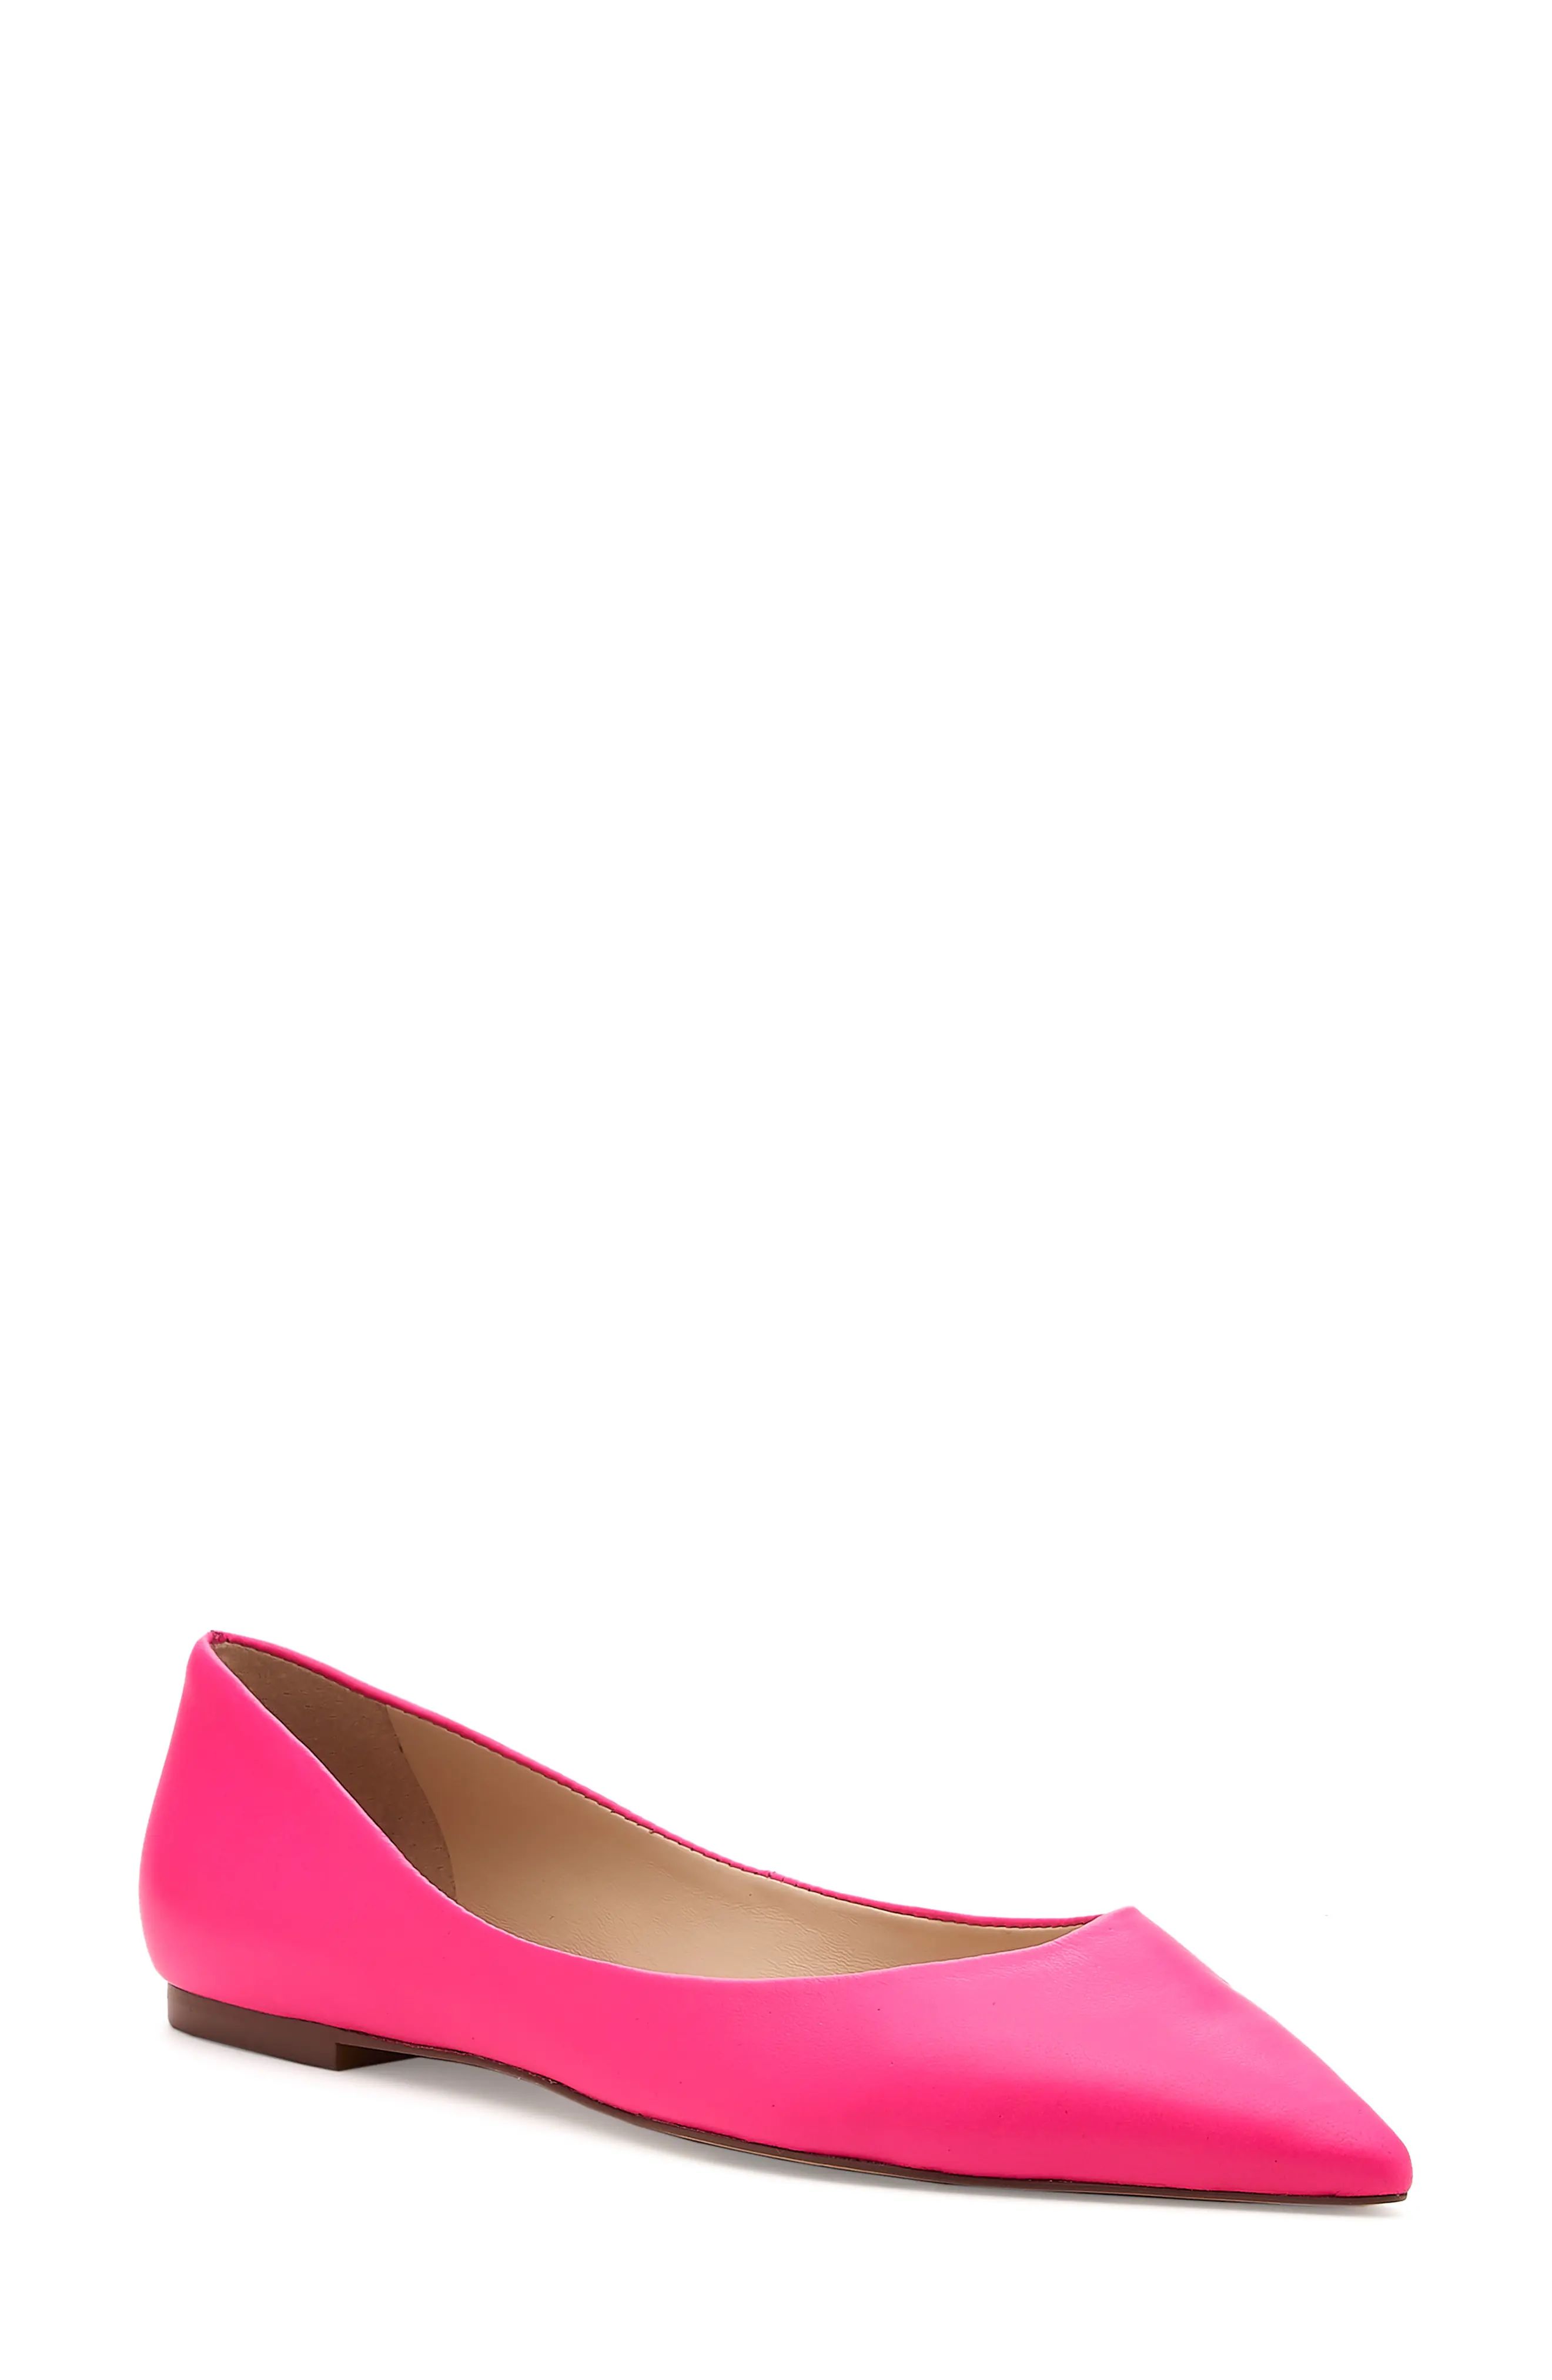 Botkier Annika Pointed Toe Flat in Glow Pink at Nordstrom, Size 5.5 | Nordstrom